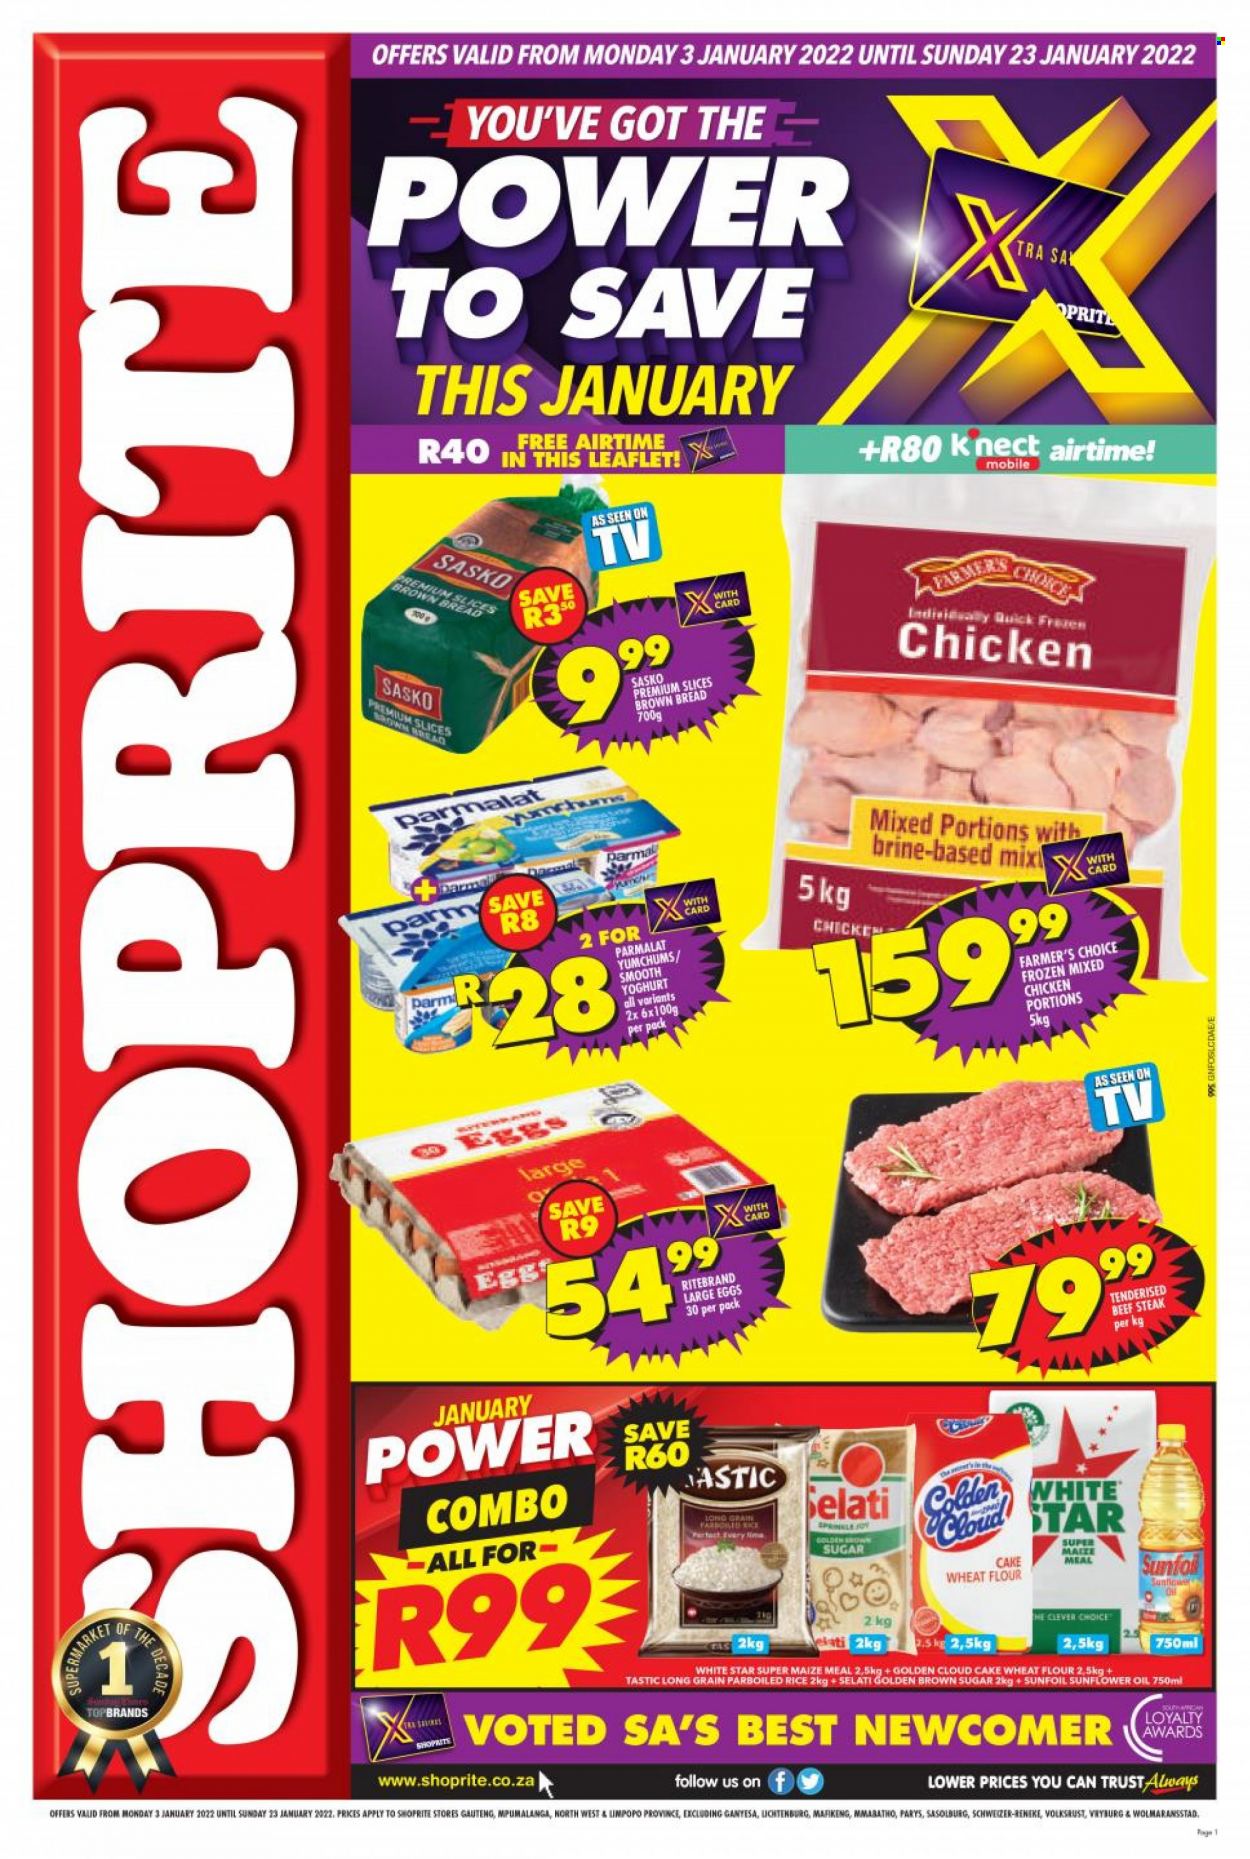 Shoprite catalogue  - 03/01/2022 - 23/01/2022 - Sales products - bread, brown bread, yoghurt, Parmalat, large eggs, cane sugar, flour, wheat flour, maize meal, cake flour, White Star, Golden Cloud, rice, parboiled rice, Tastic, sunflower oil, oil, beef meat, beef steak, steak. Page 1.